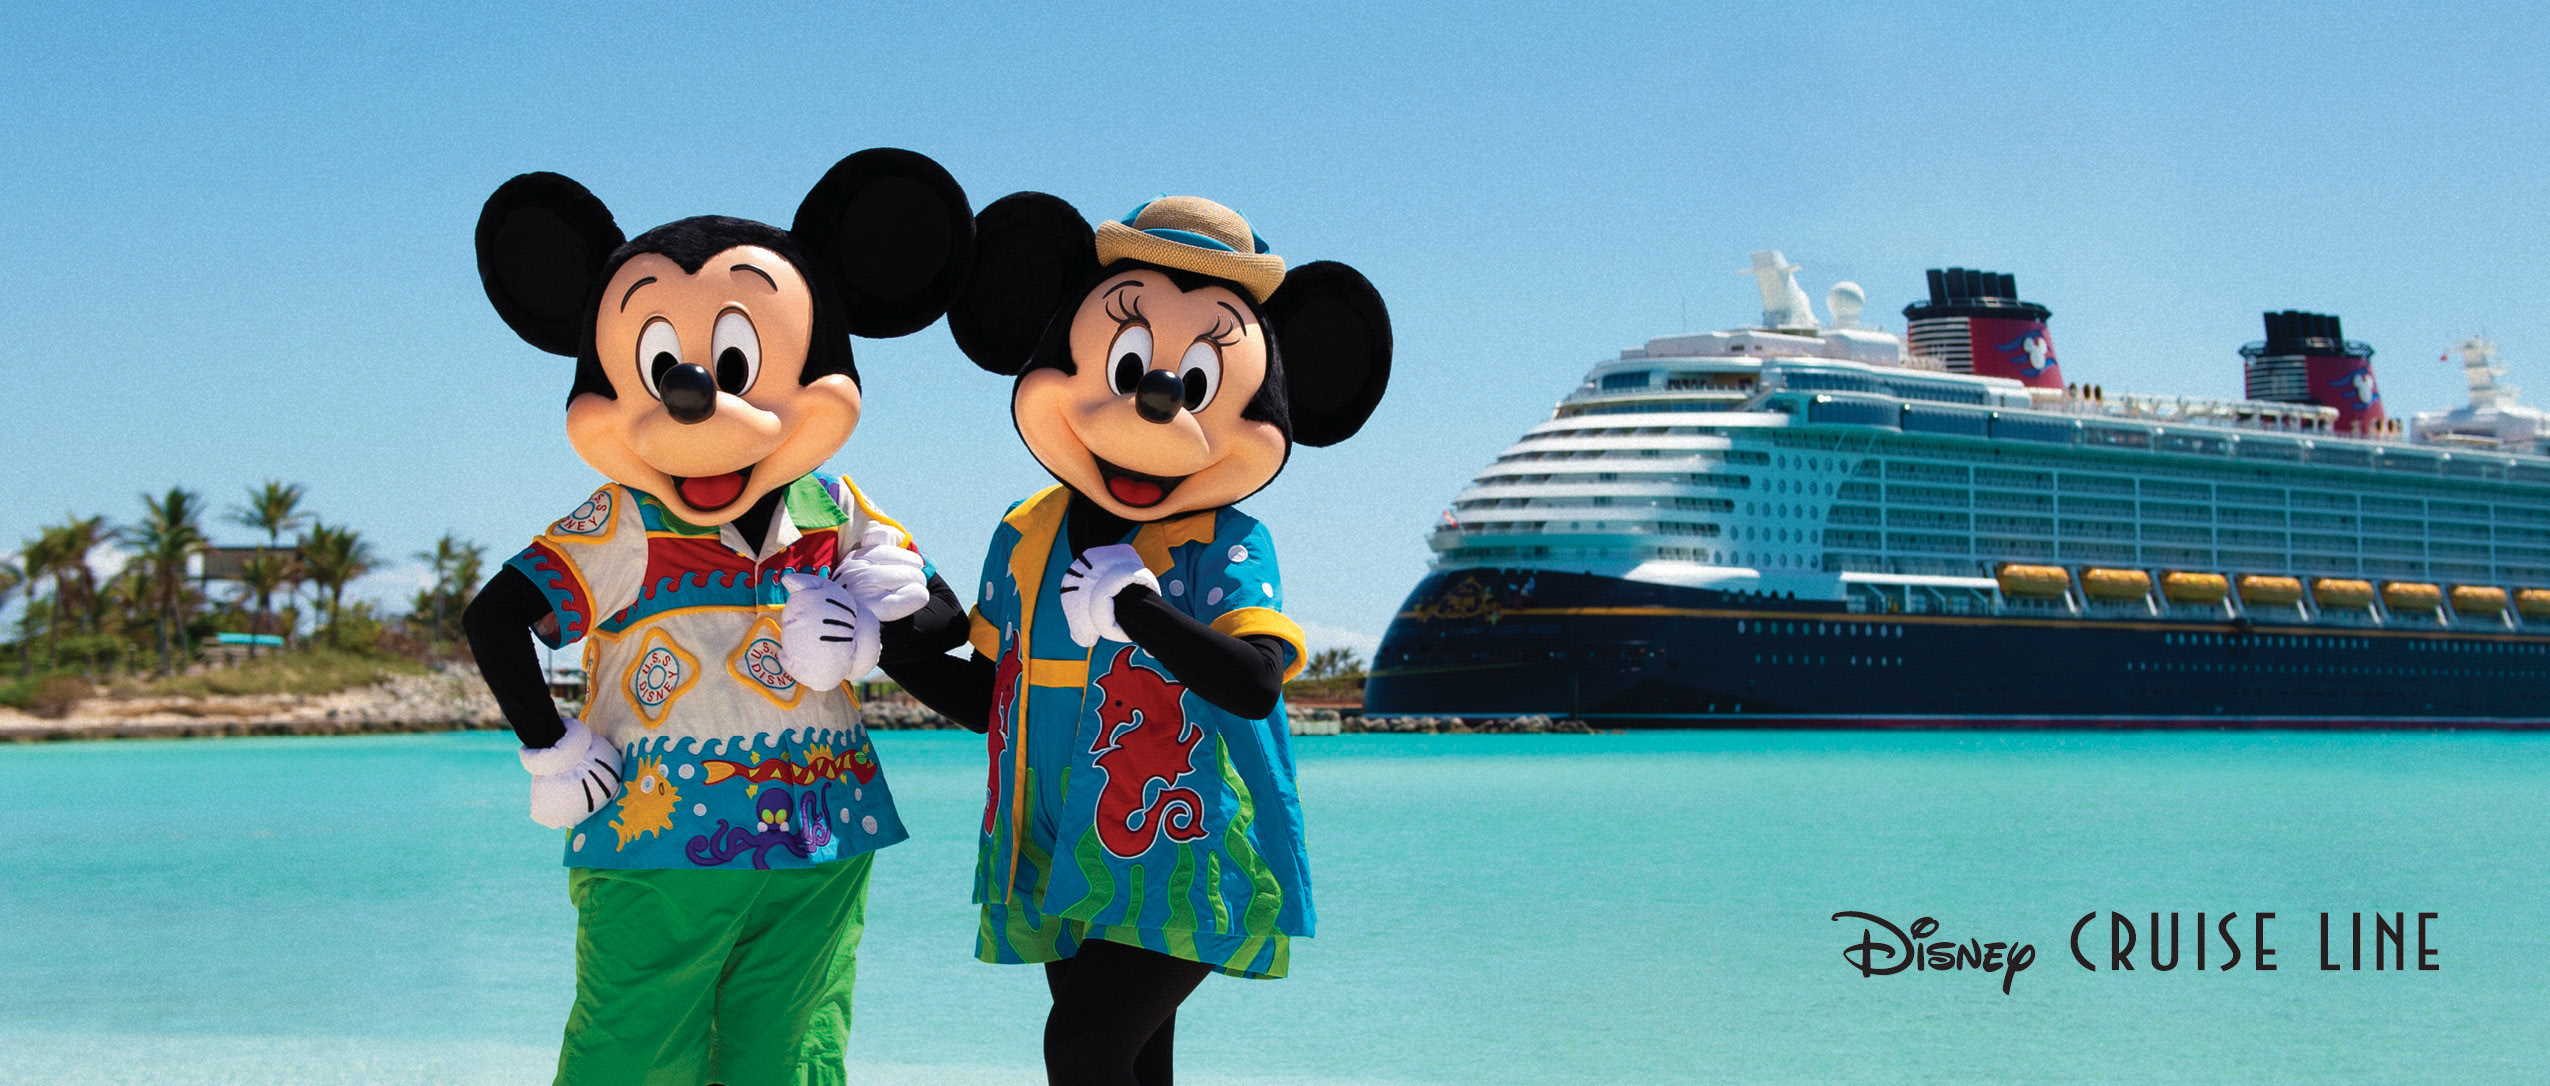 Disney Cruise Line image with Mickey and Minnie